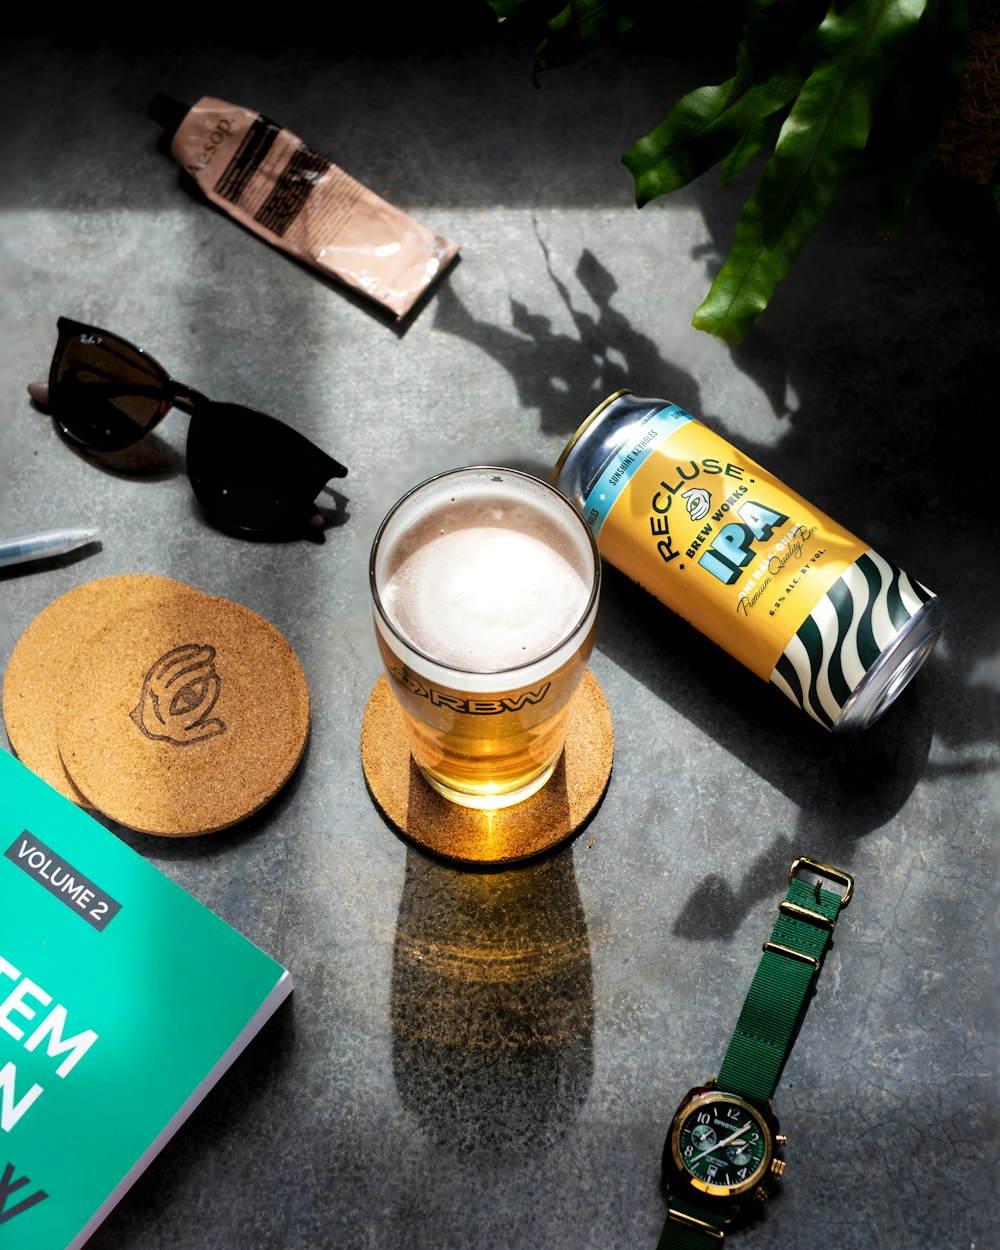 a glass of beer next to a book and a watch